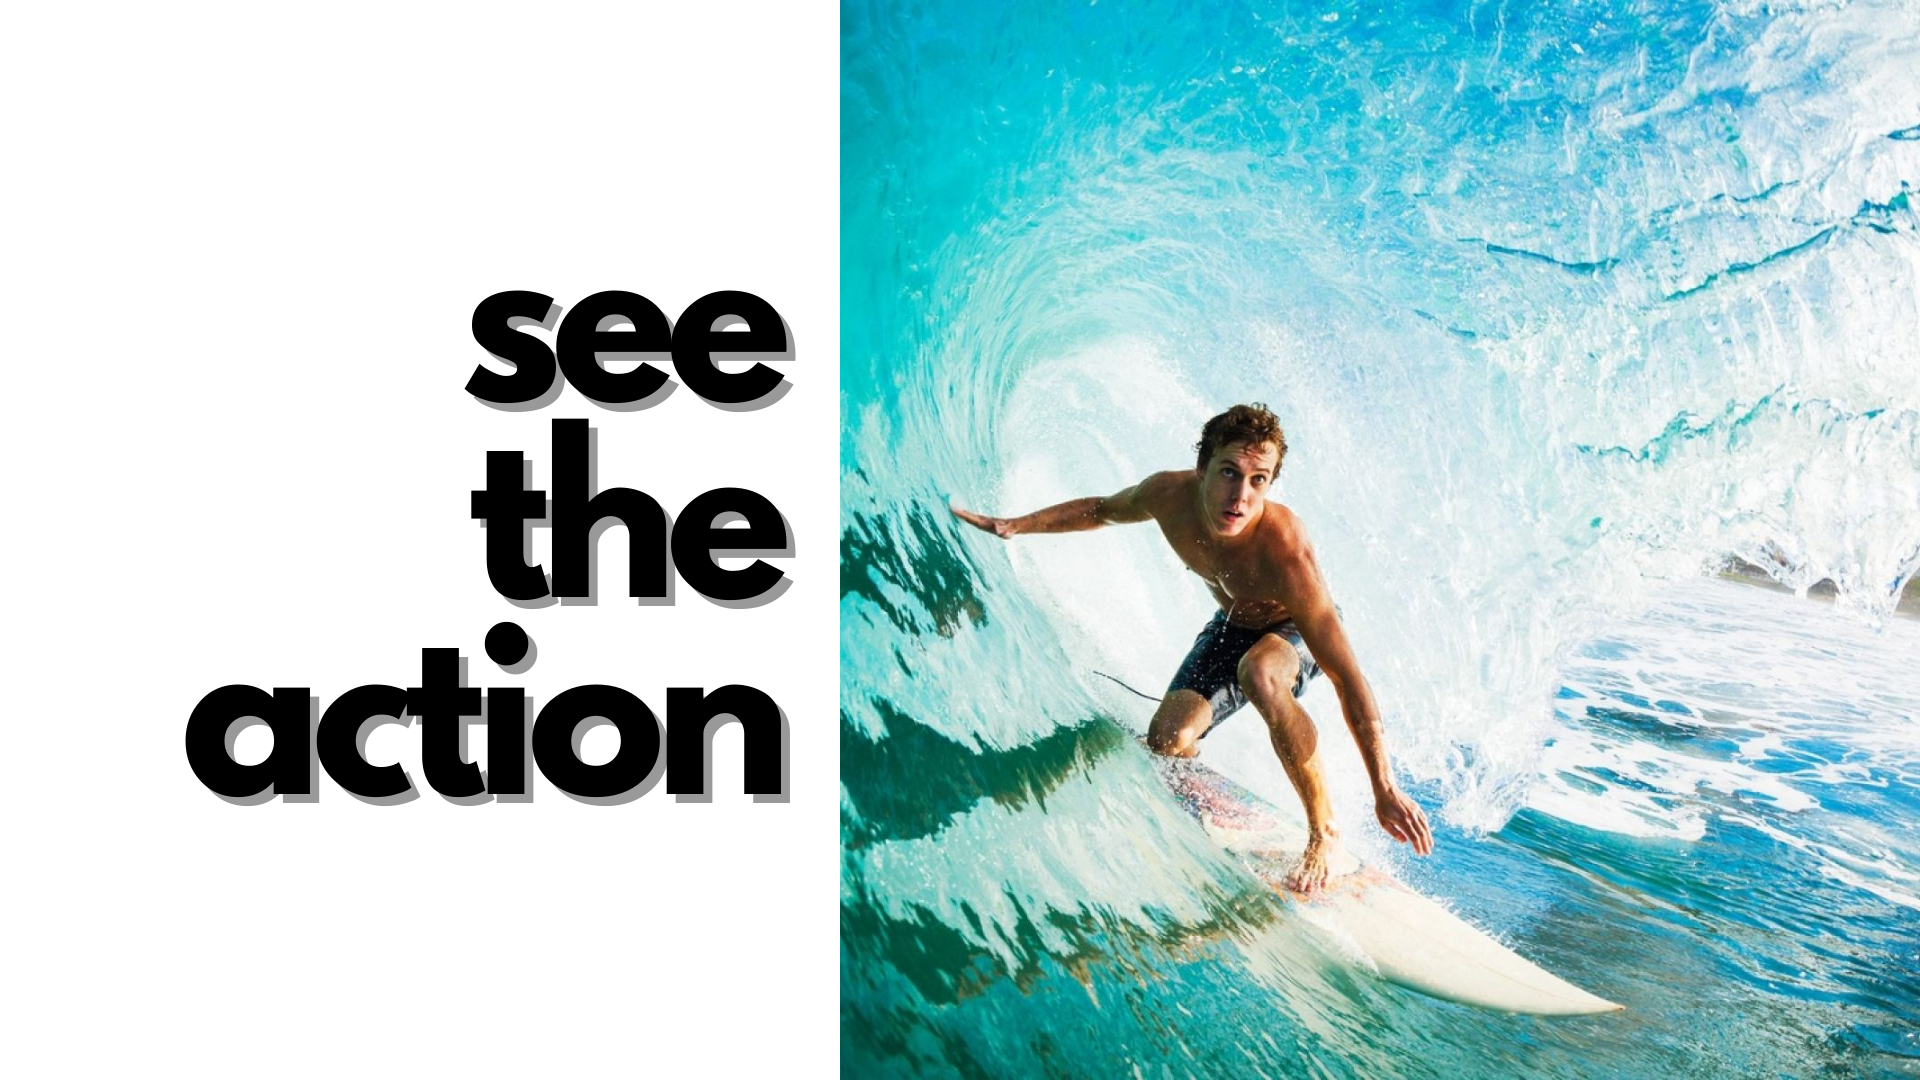 surfer riding a big wave with text to the left saying see the action